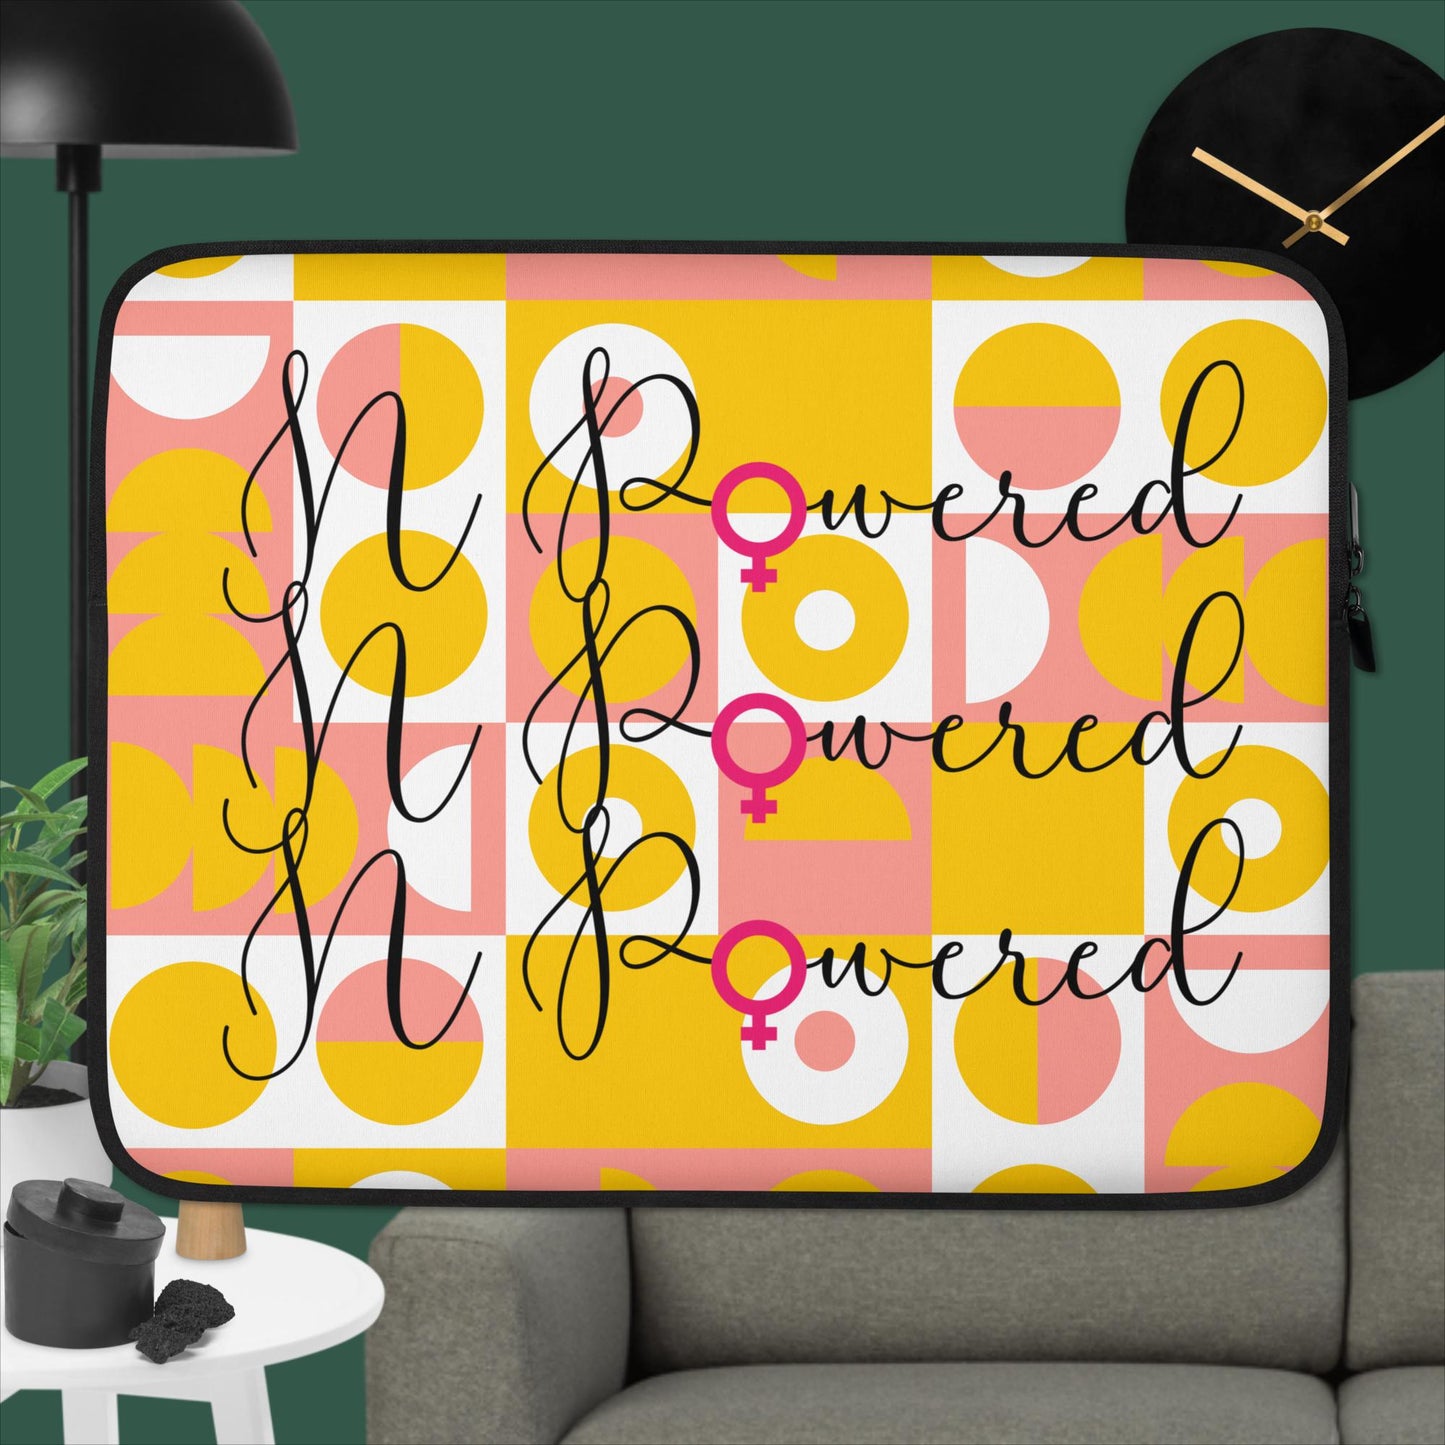 N-Powered Woman Women's Empowerment Laptop Cover